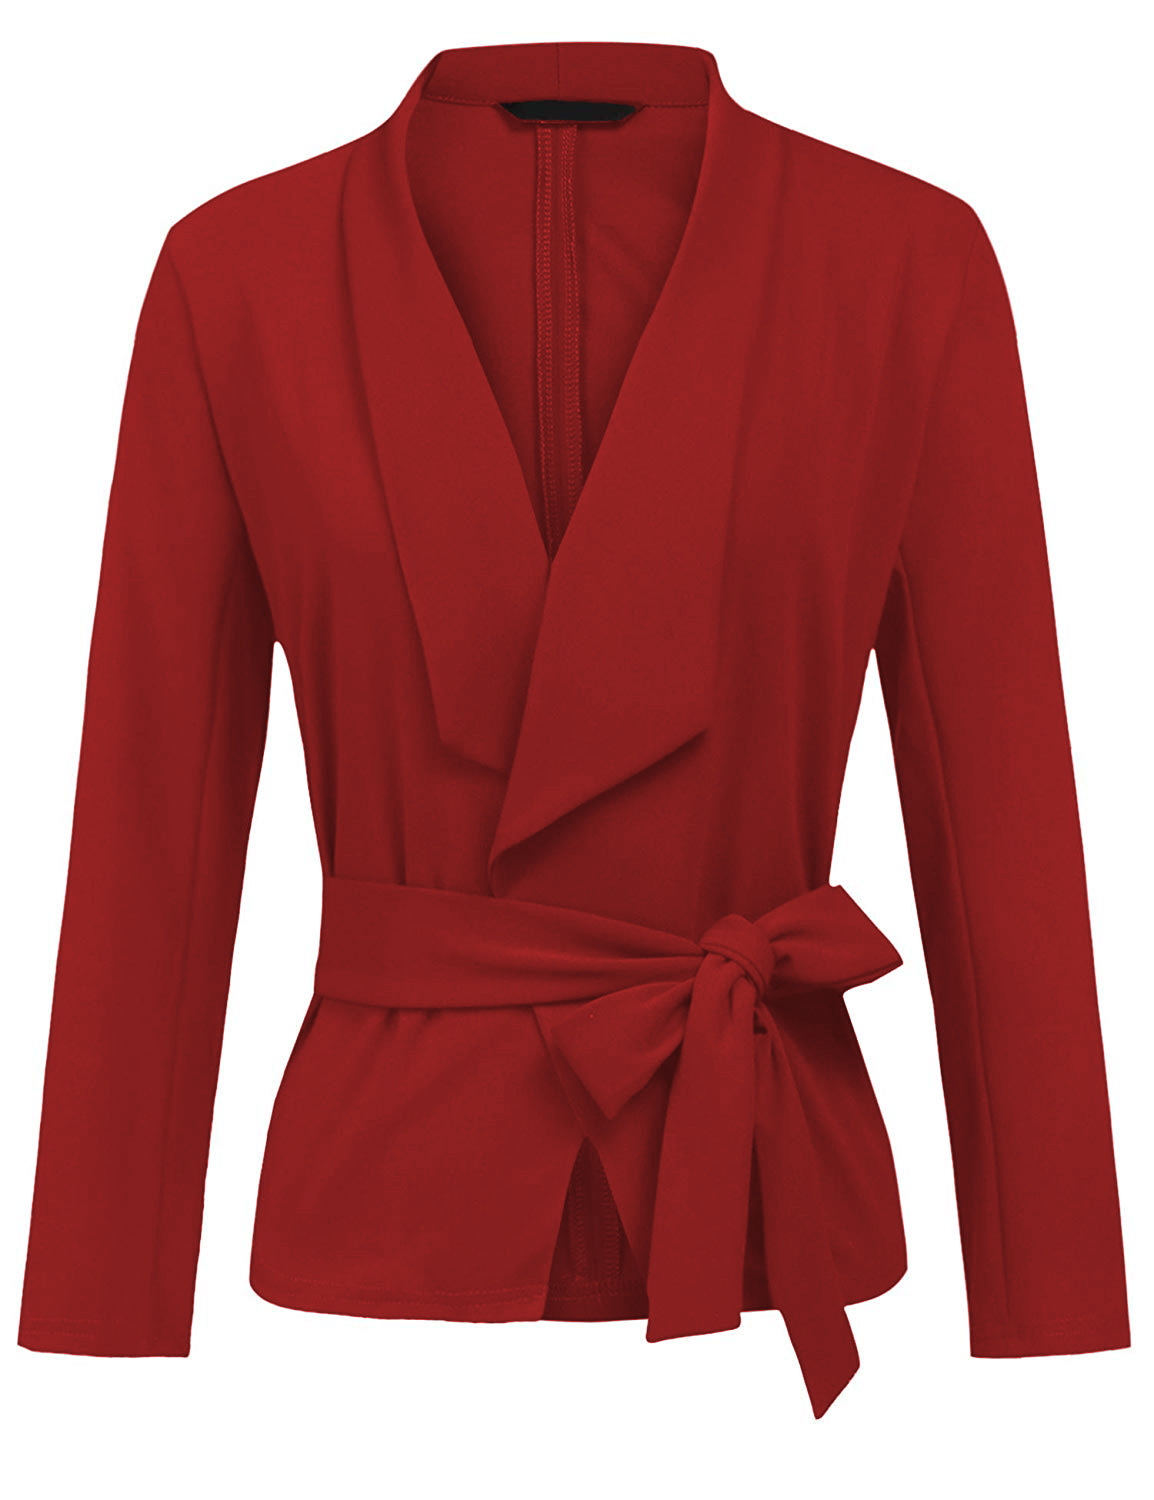 Women Blazer Coat Autumn Long Sleeve Belted Casual Work Office Lady Slim Suit Jacket red